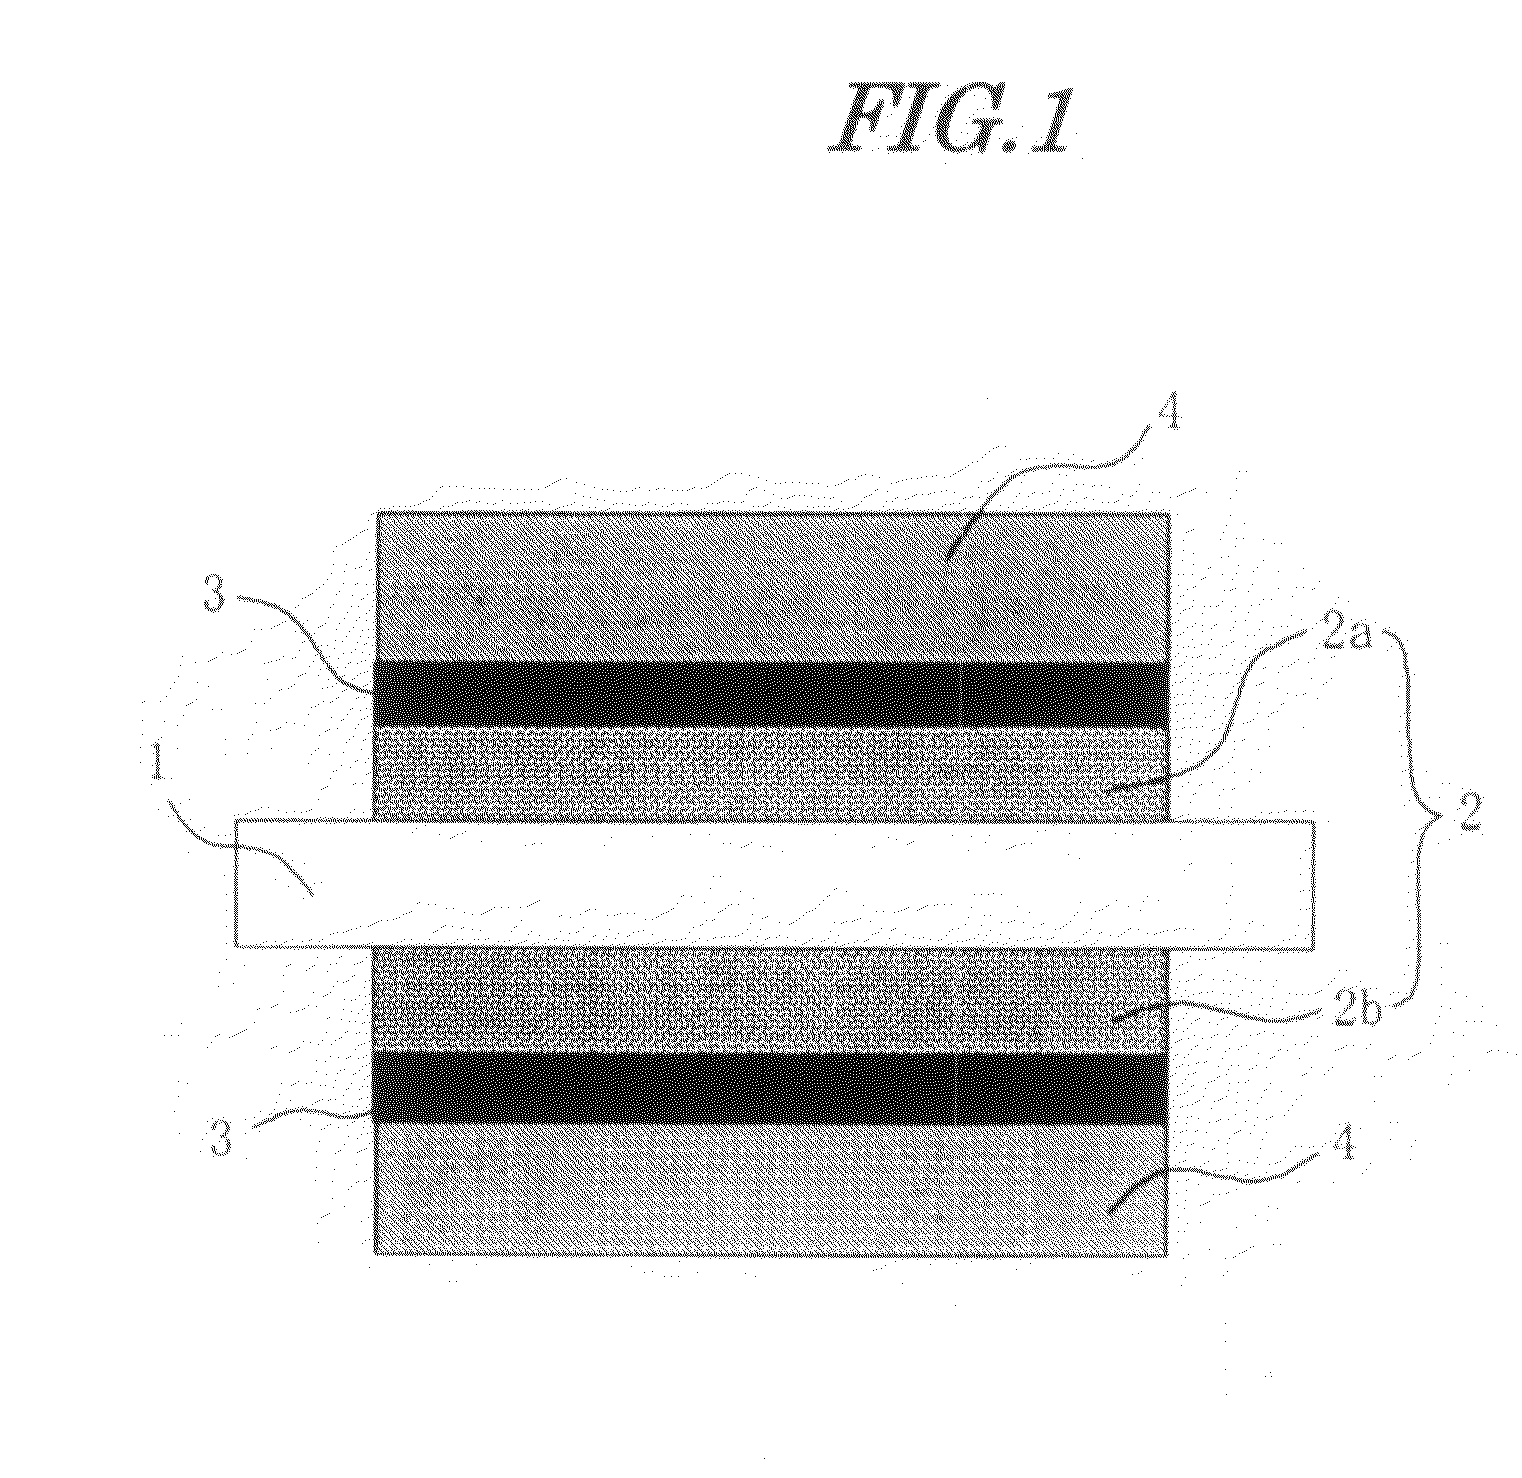 Membrane electrode assembly and direct liquid fuel cell